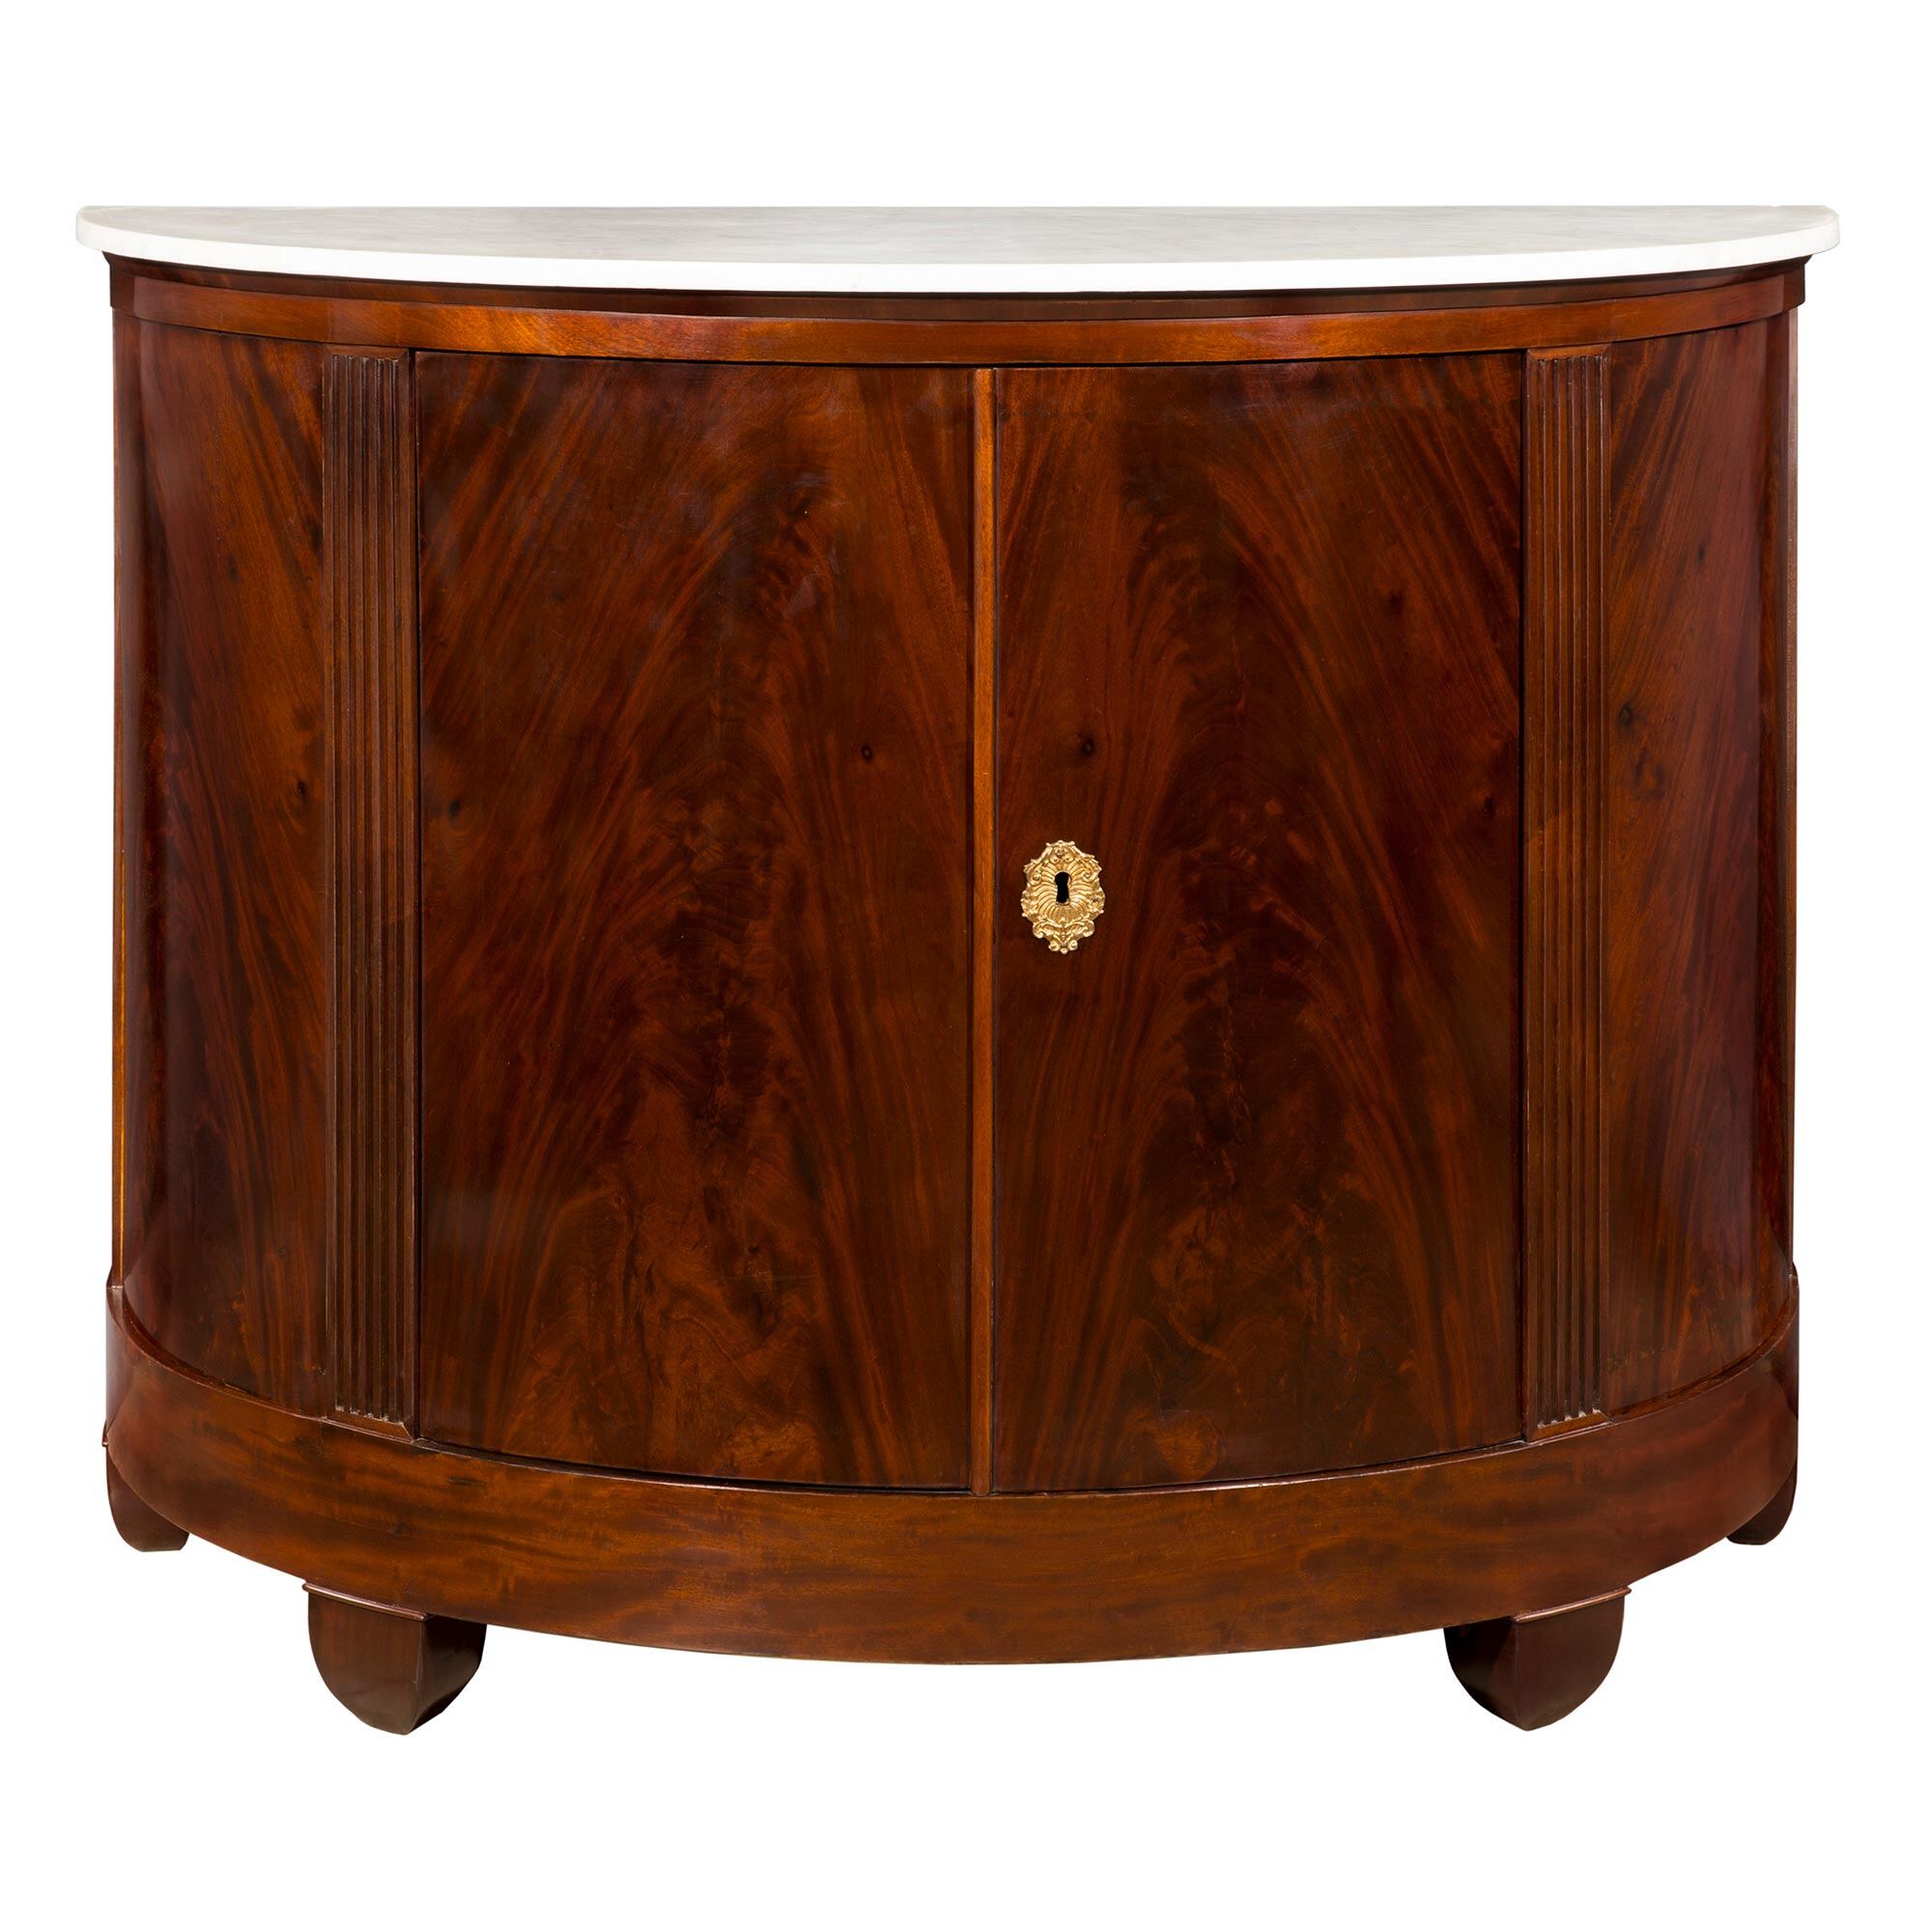 A French Early 19th Century Flamed Mahogany Demi Lune Console